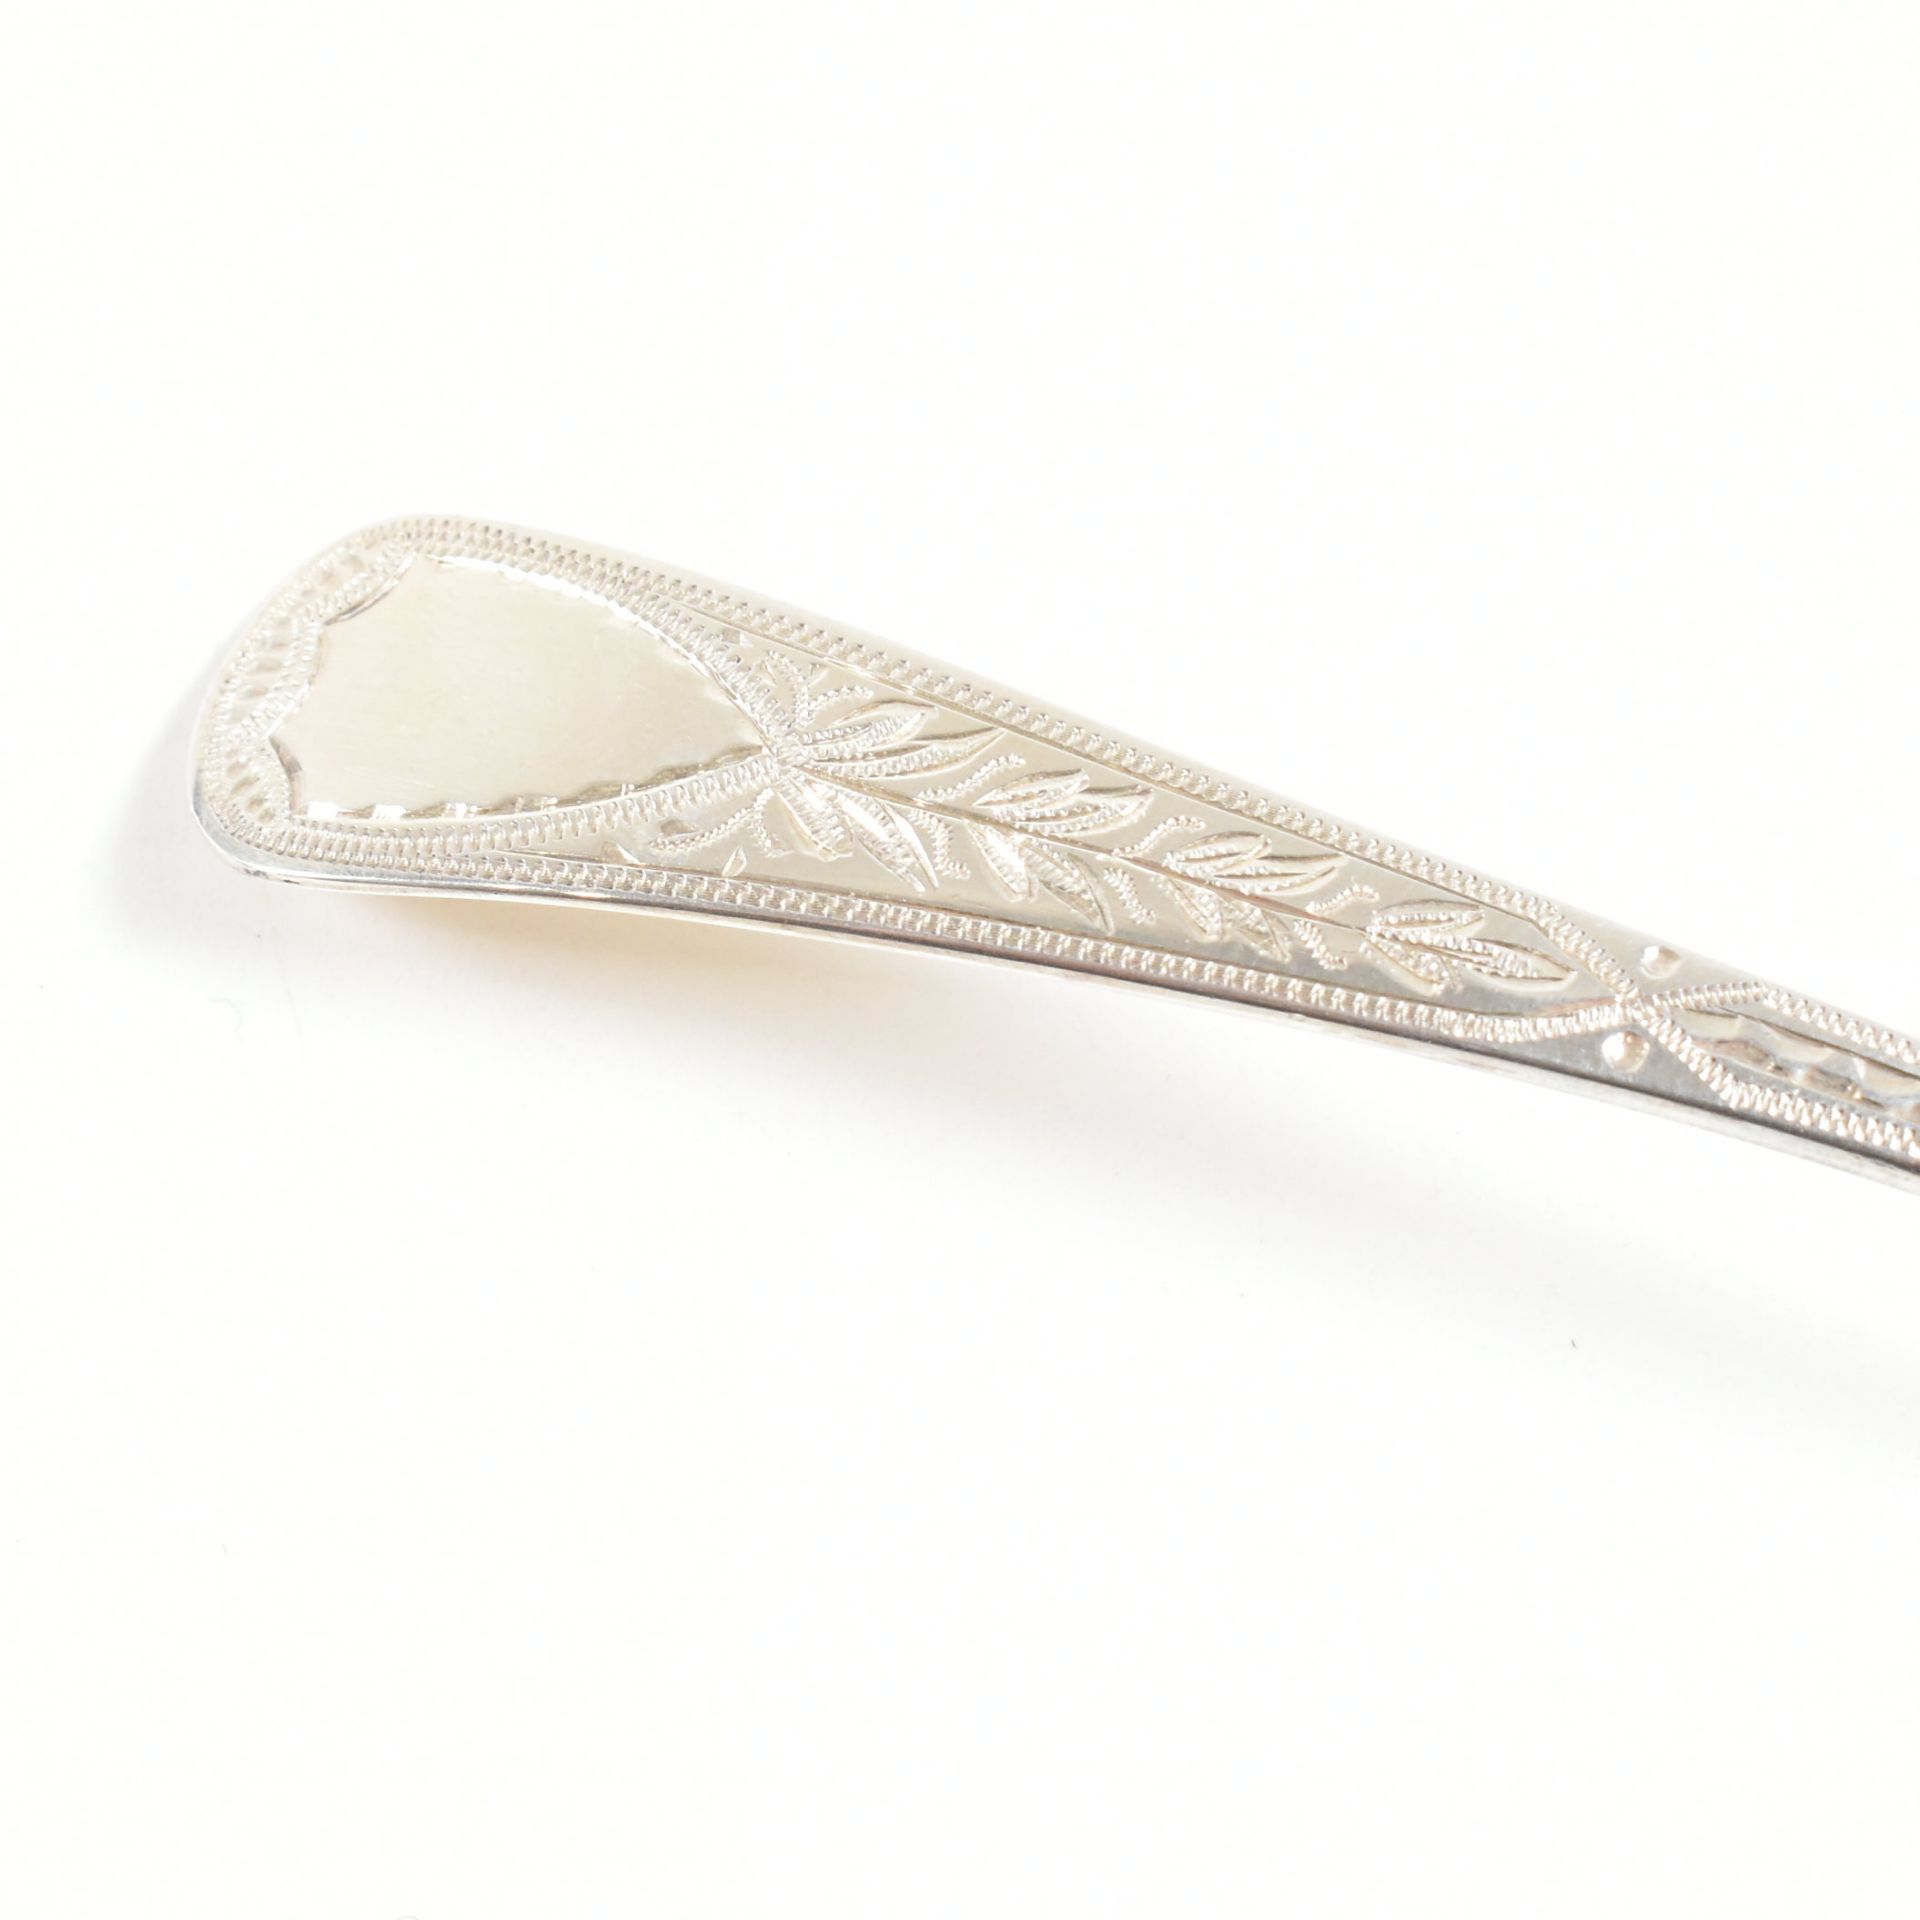 CASED GEORGE II HALLMARKED SILVER SUGAR SIFTER SPOON - Image 12 of 12